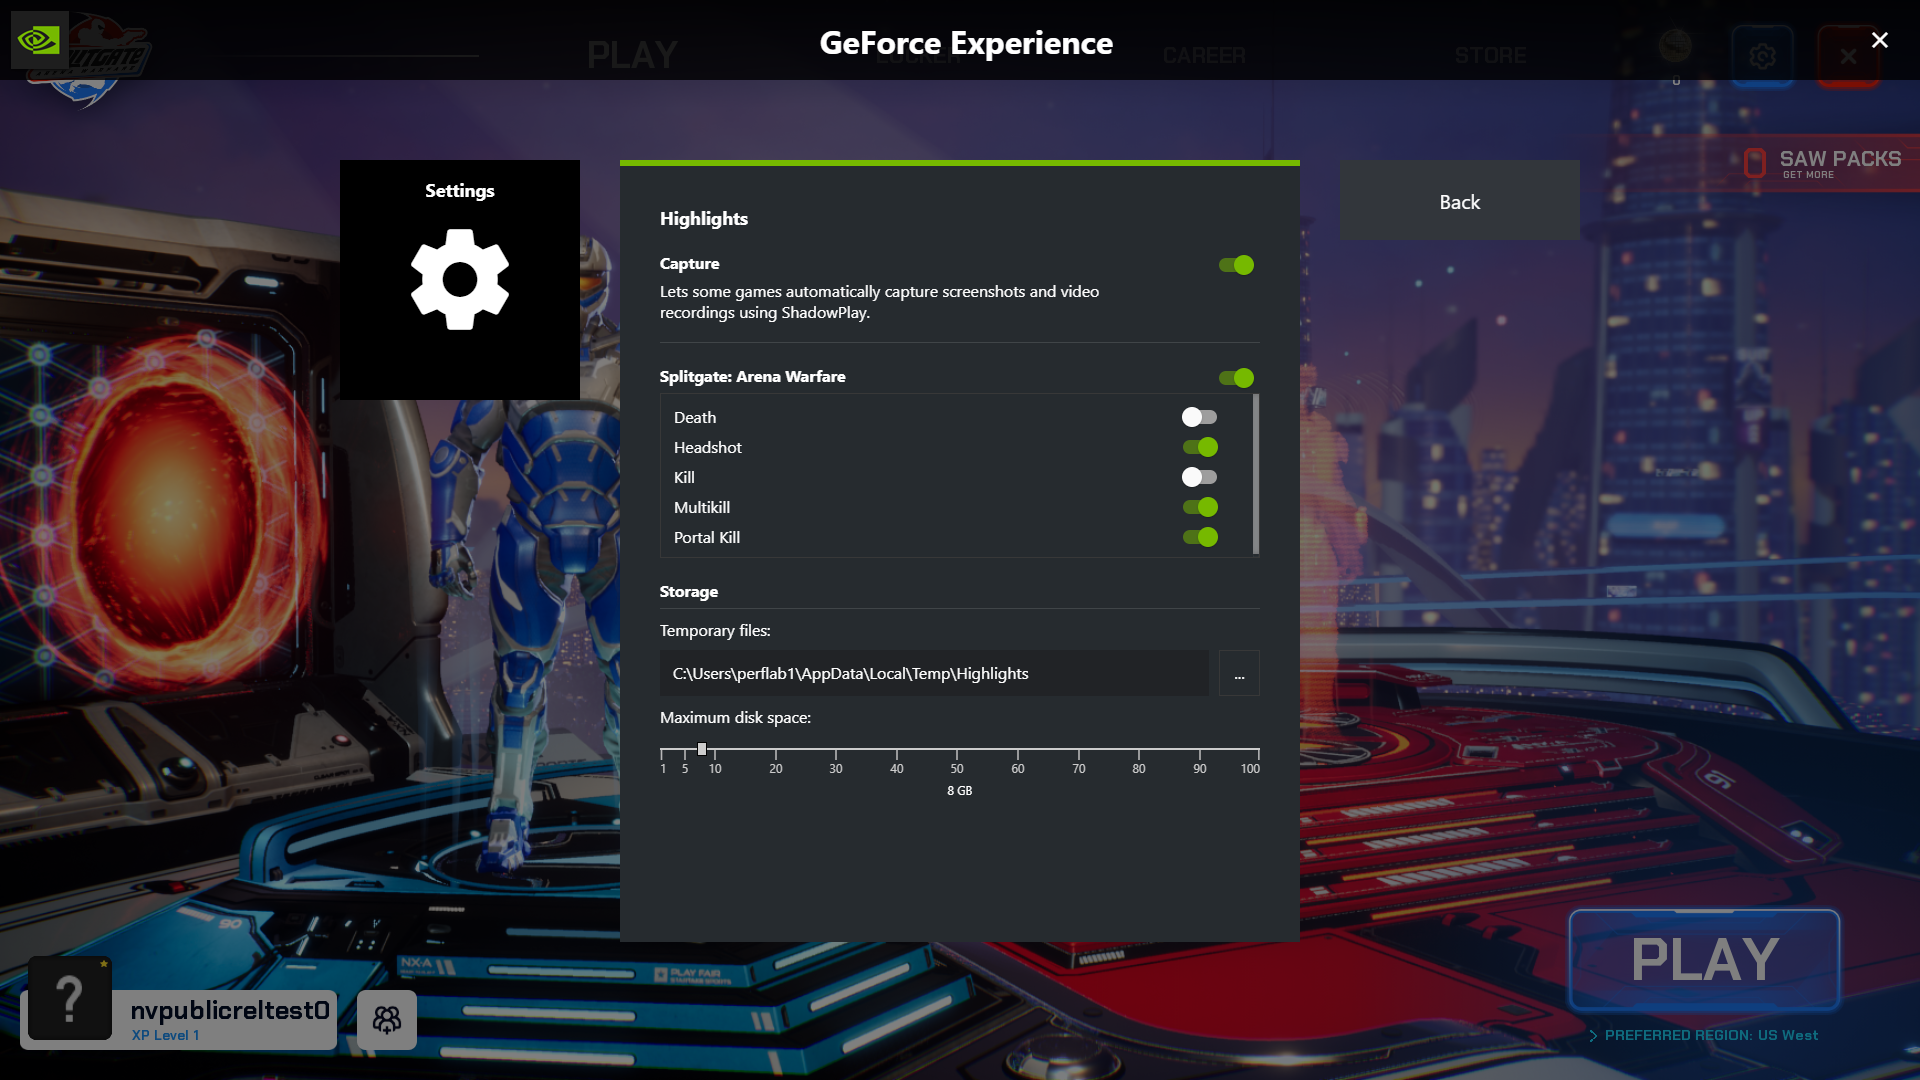 Splitgate: Arena Warfare Adds NVIDIA Highlights As Of Major Game Update | GeForce | NVIDIA